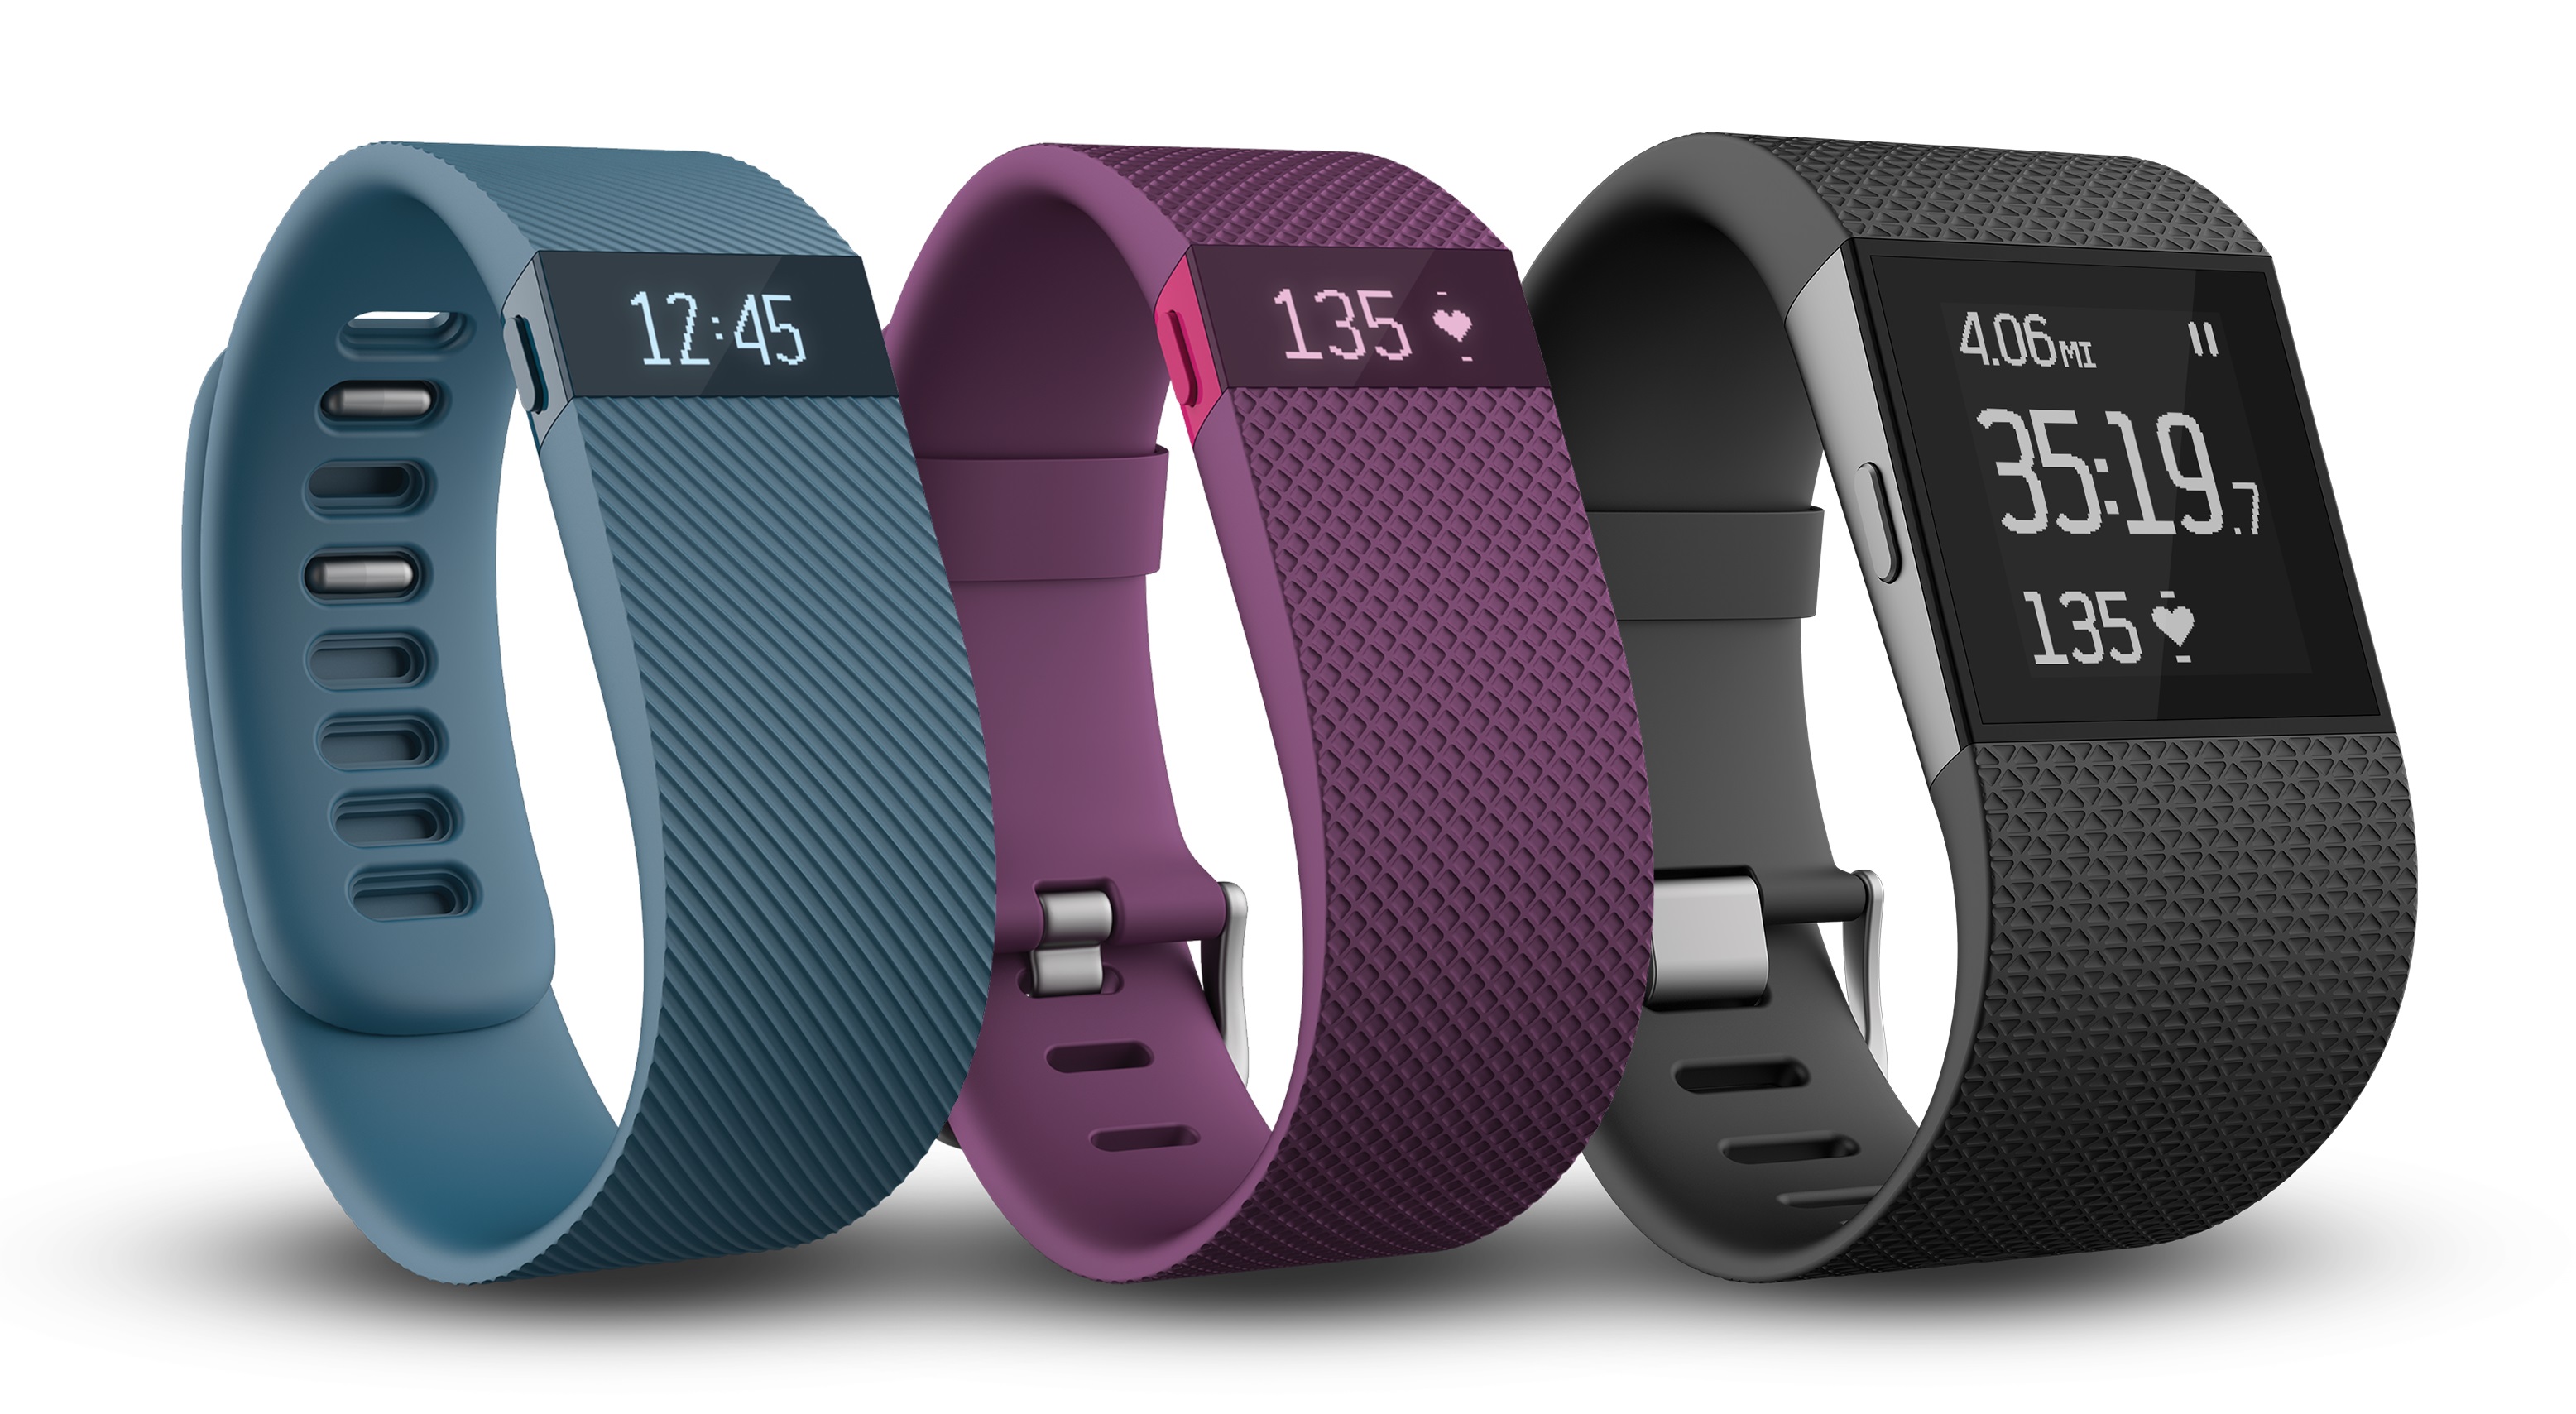 the latest fitbit watch